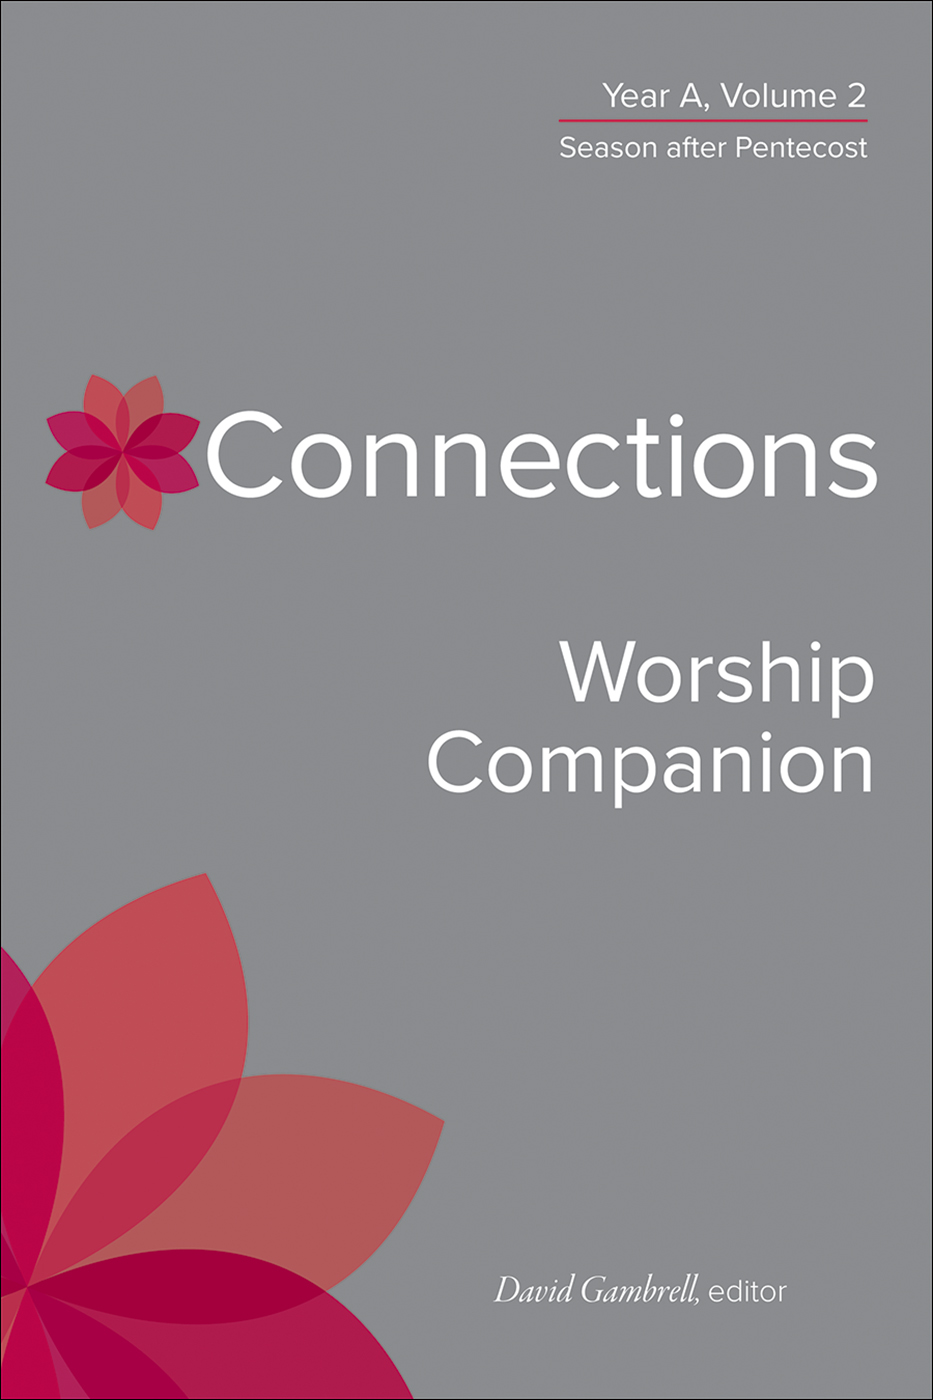 Connections Worship Companion, Year A, Volume 2